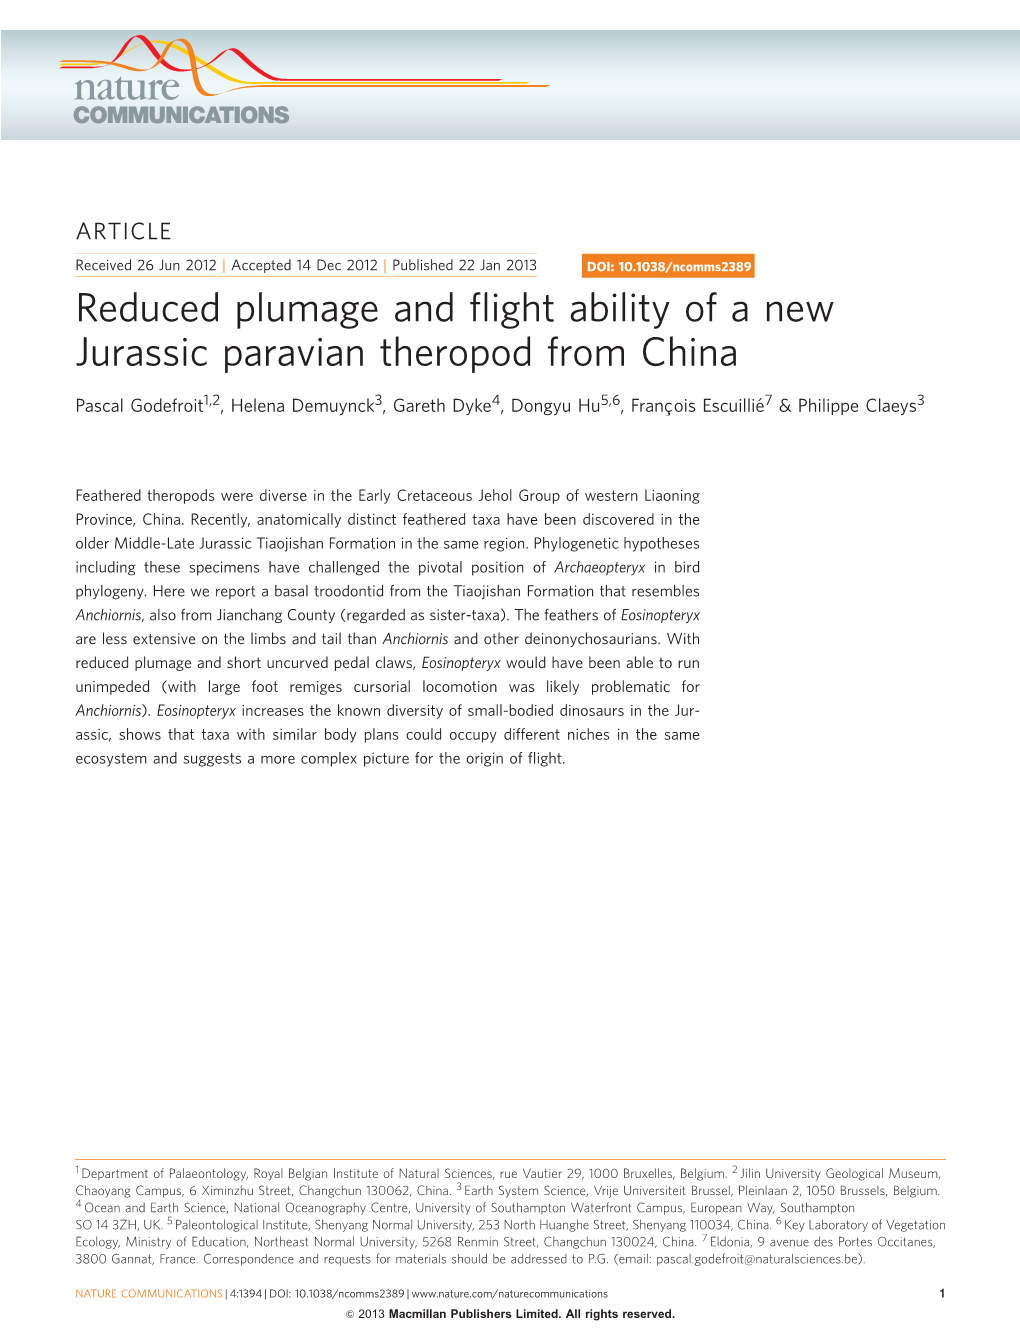 Reduced Plumage and Flight Ability of a New Jurassic Paravian Theropod